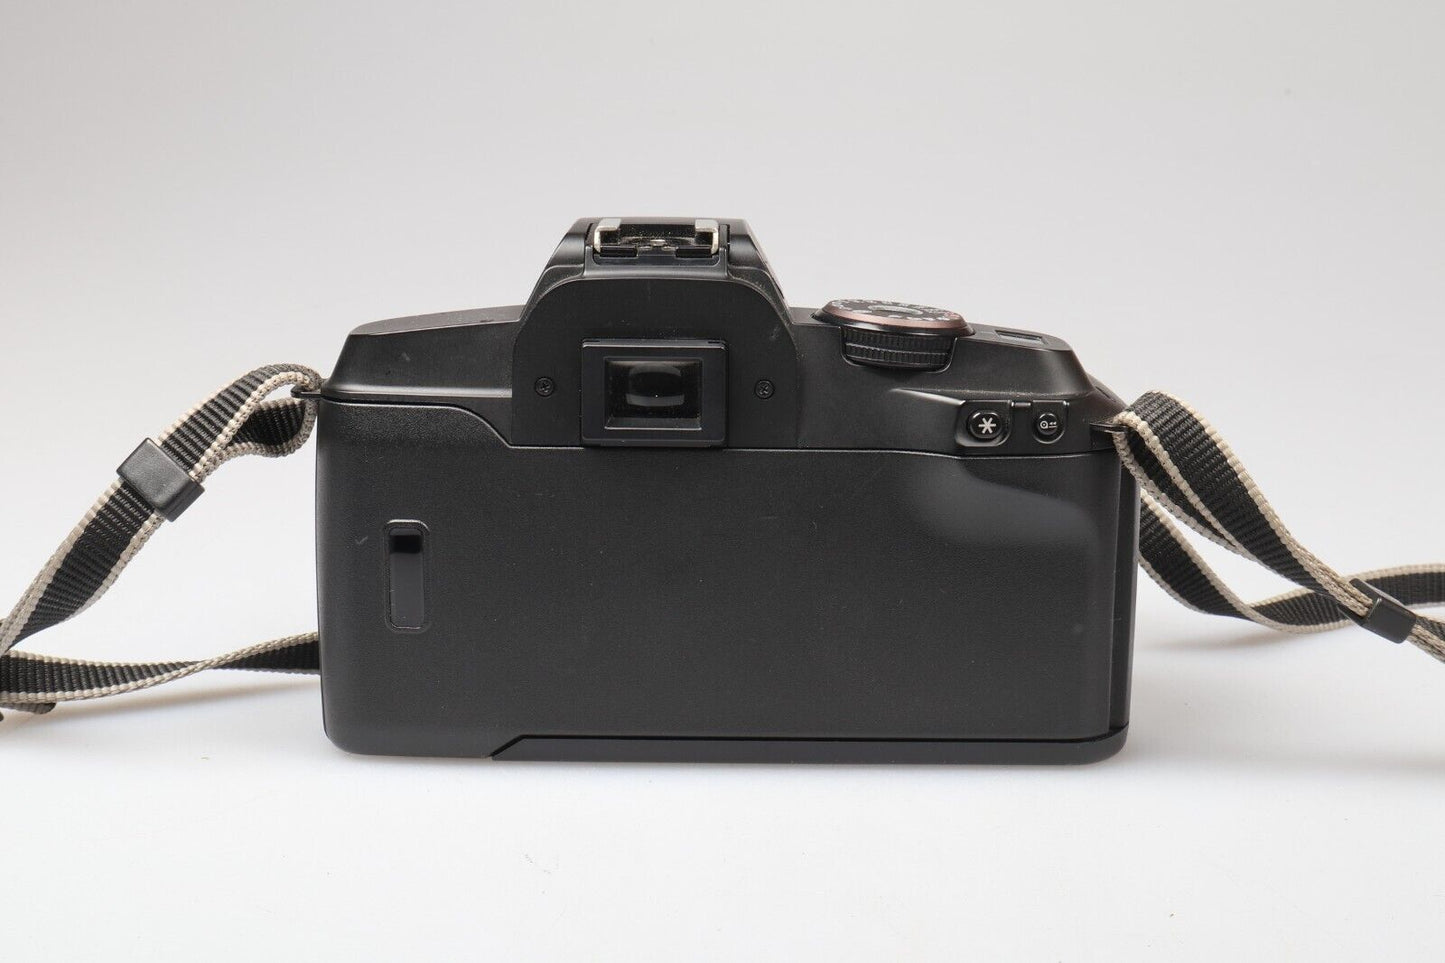 Canon EOS 5000 | 35mm SLR Film Camera | Body Only